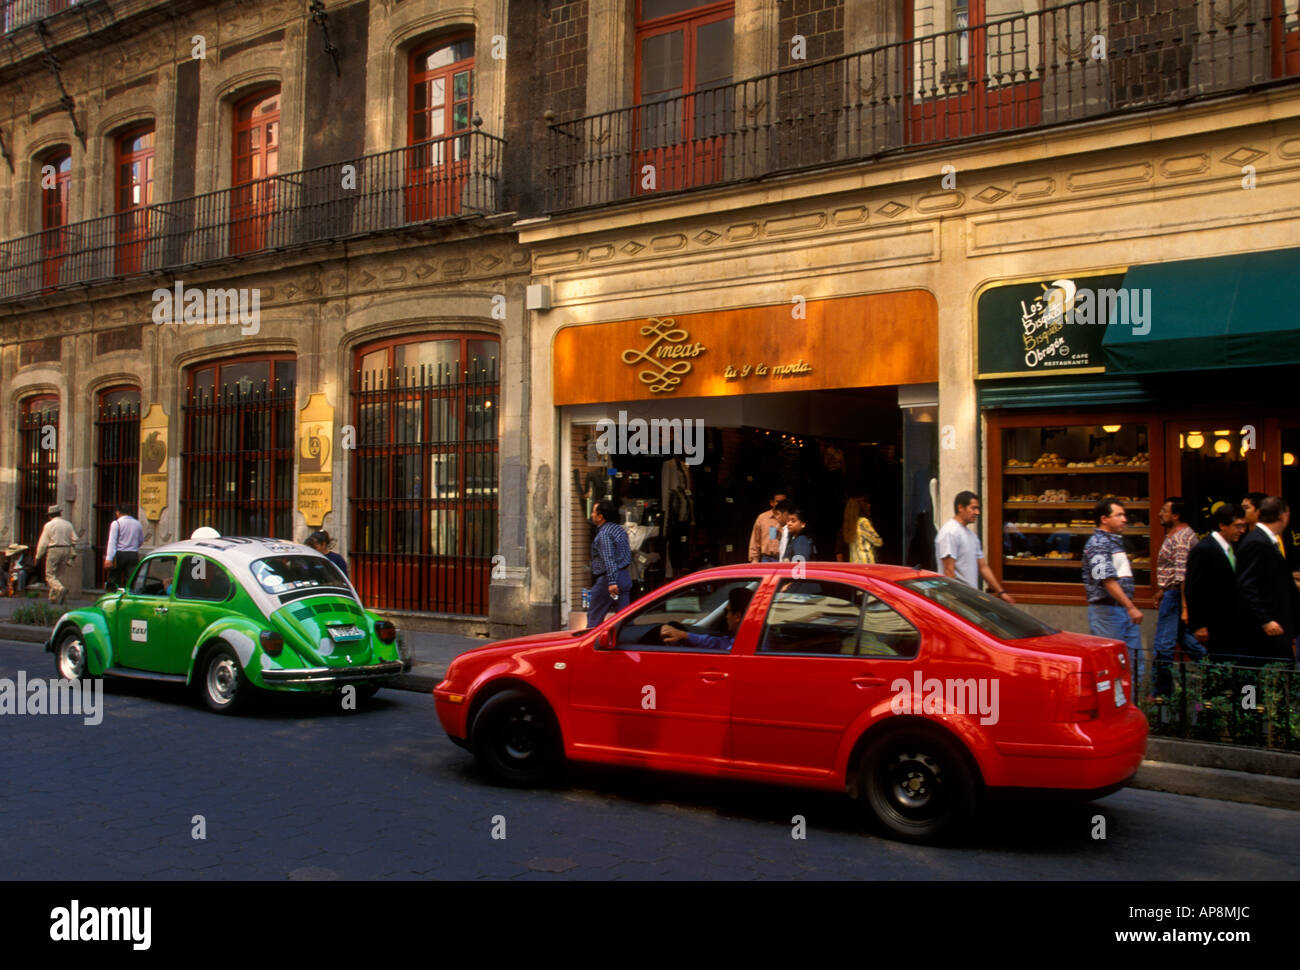 red car, shops, stores, shopping, Calle Francisco I Madero, Mexico City, Federal District, Mexico Stock Photo